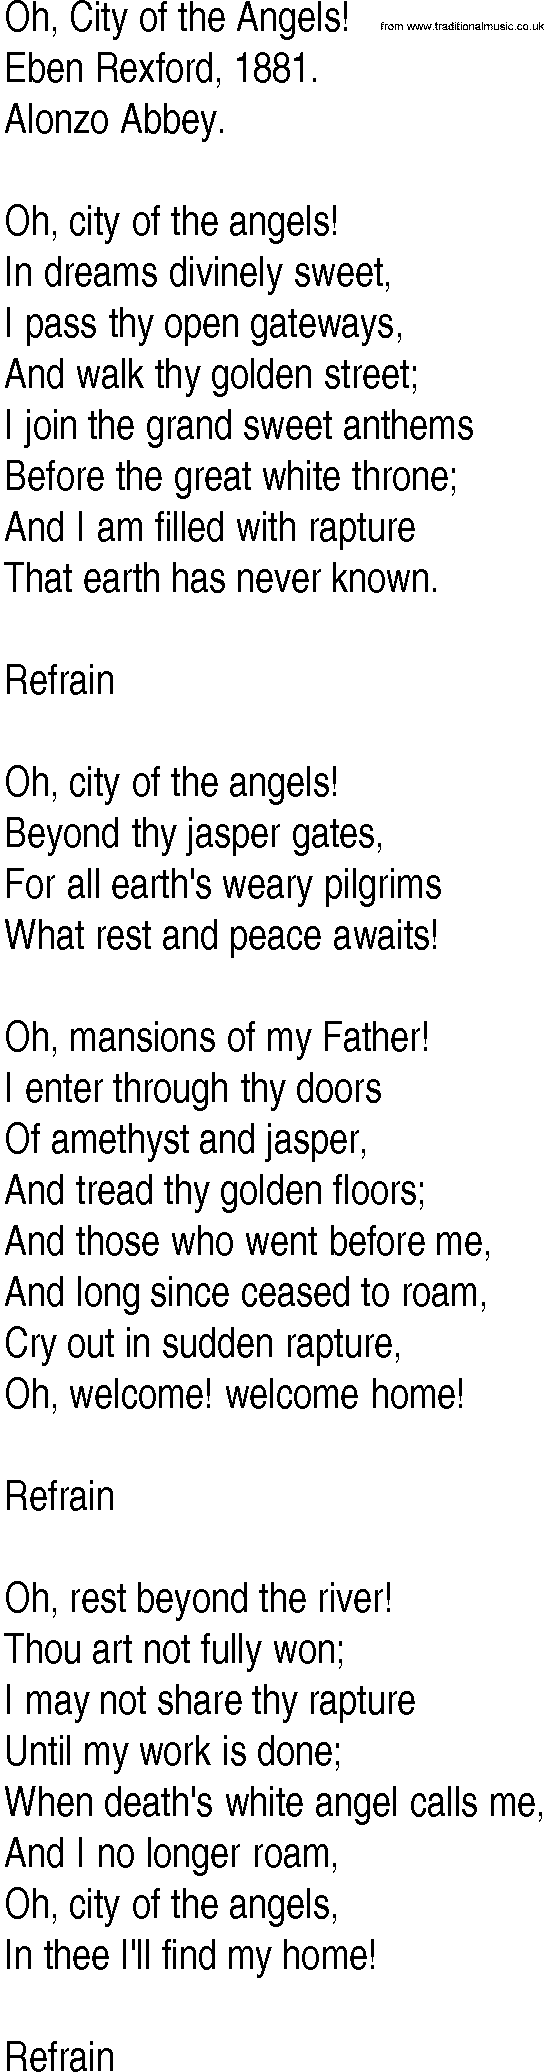 Hymn and Gospel Song: Oh, City of the Angels! by Eben Rexford lyrics